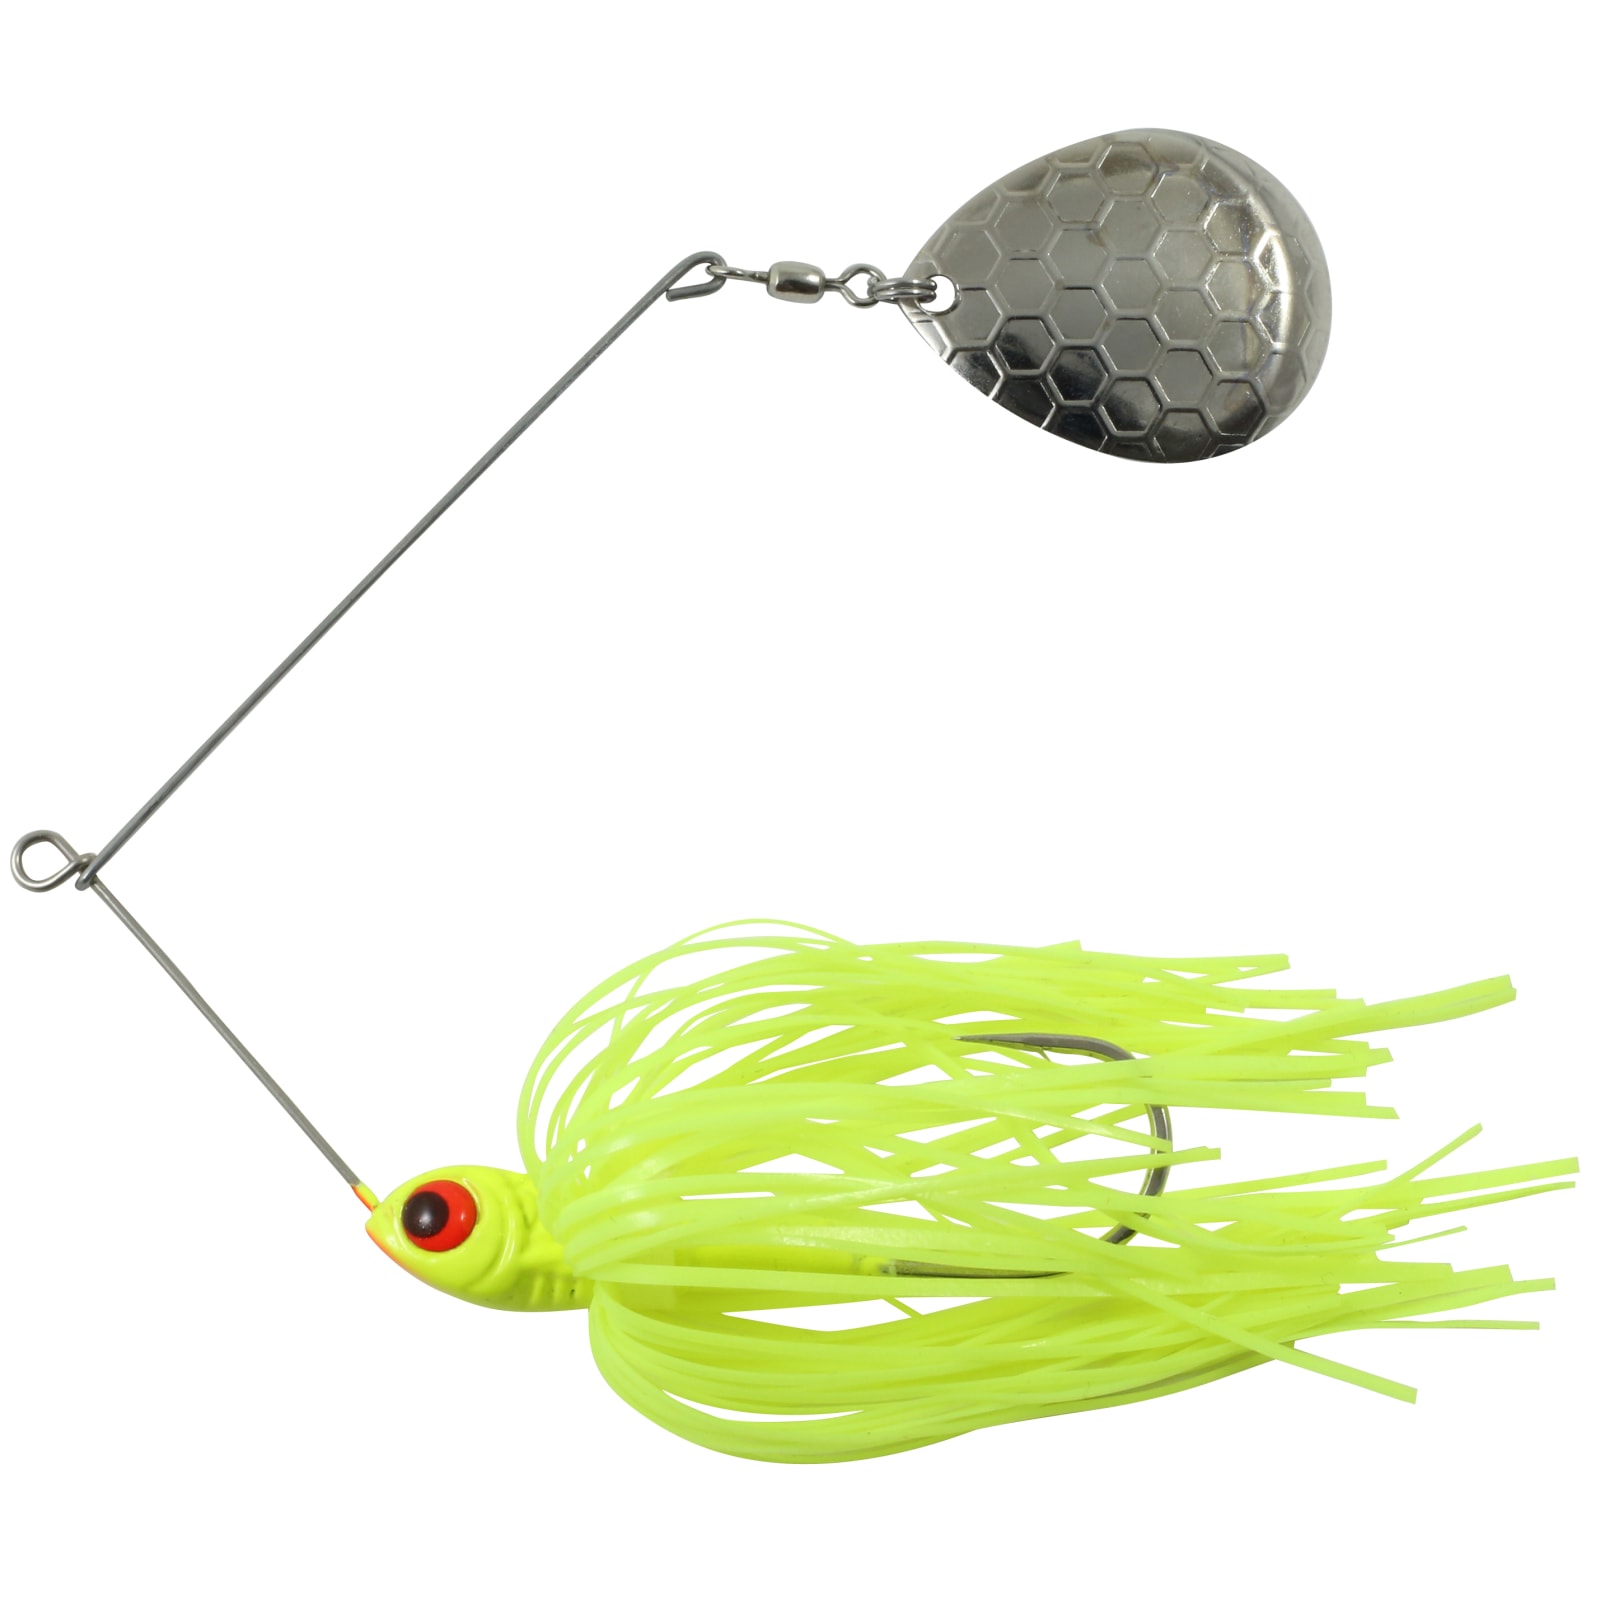 Canary Tandem Reed-Runner Spinnerbait